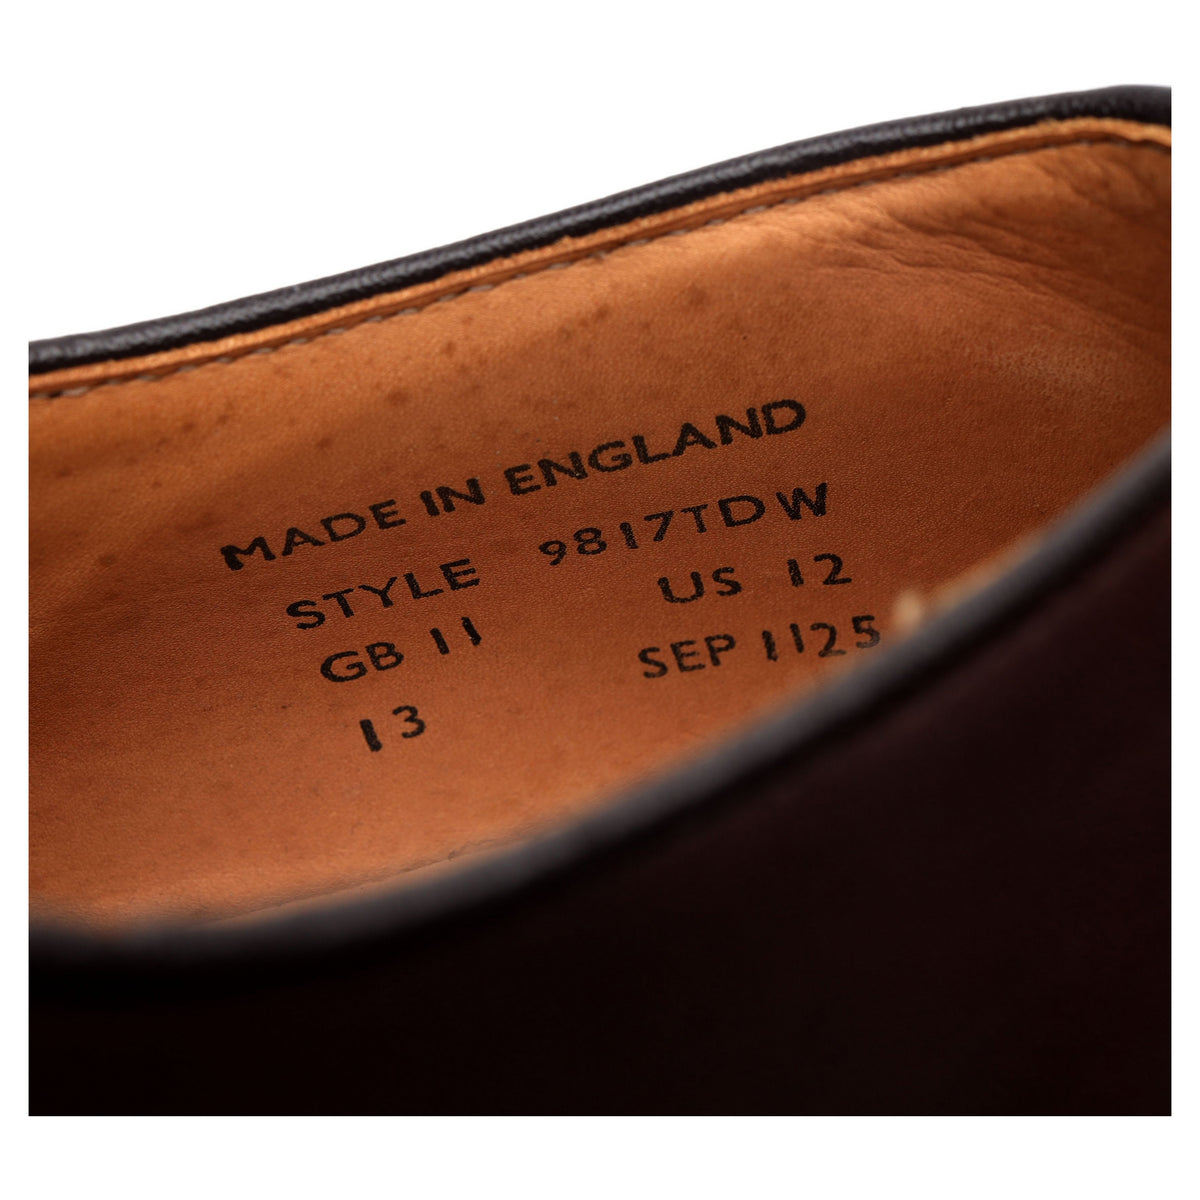 Mark McNairy Brown Leather Derby UK 11